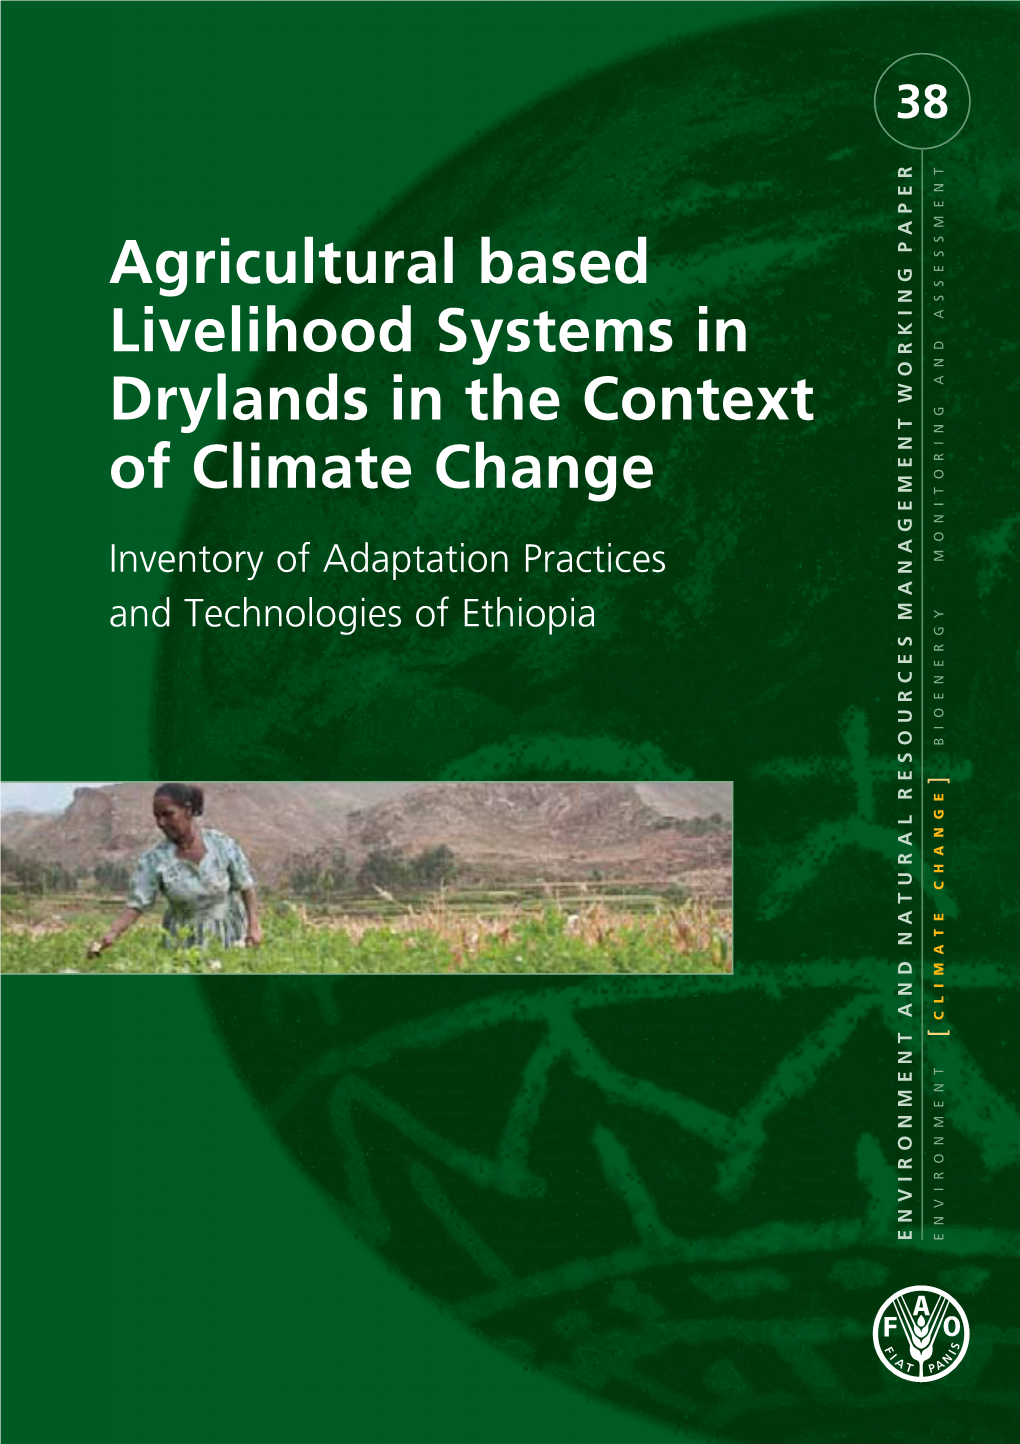 Agricultural Based Livelihood Systems in Drylands in the Context of Climate Change